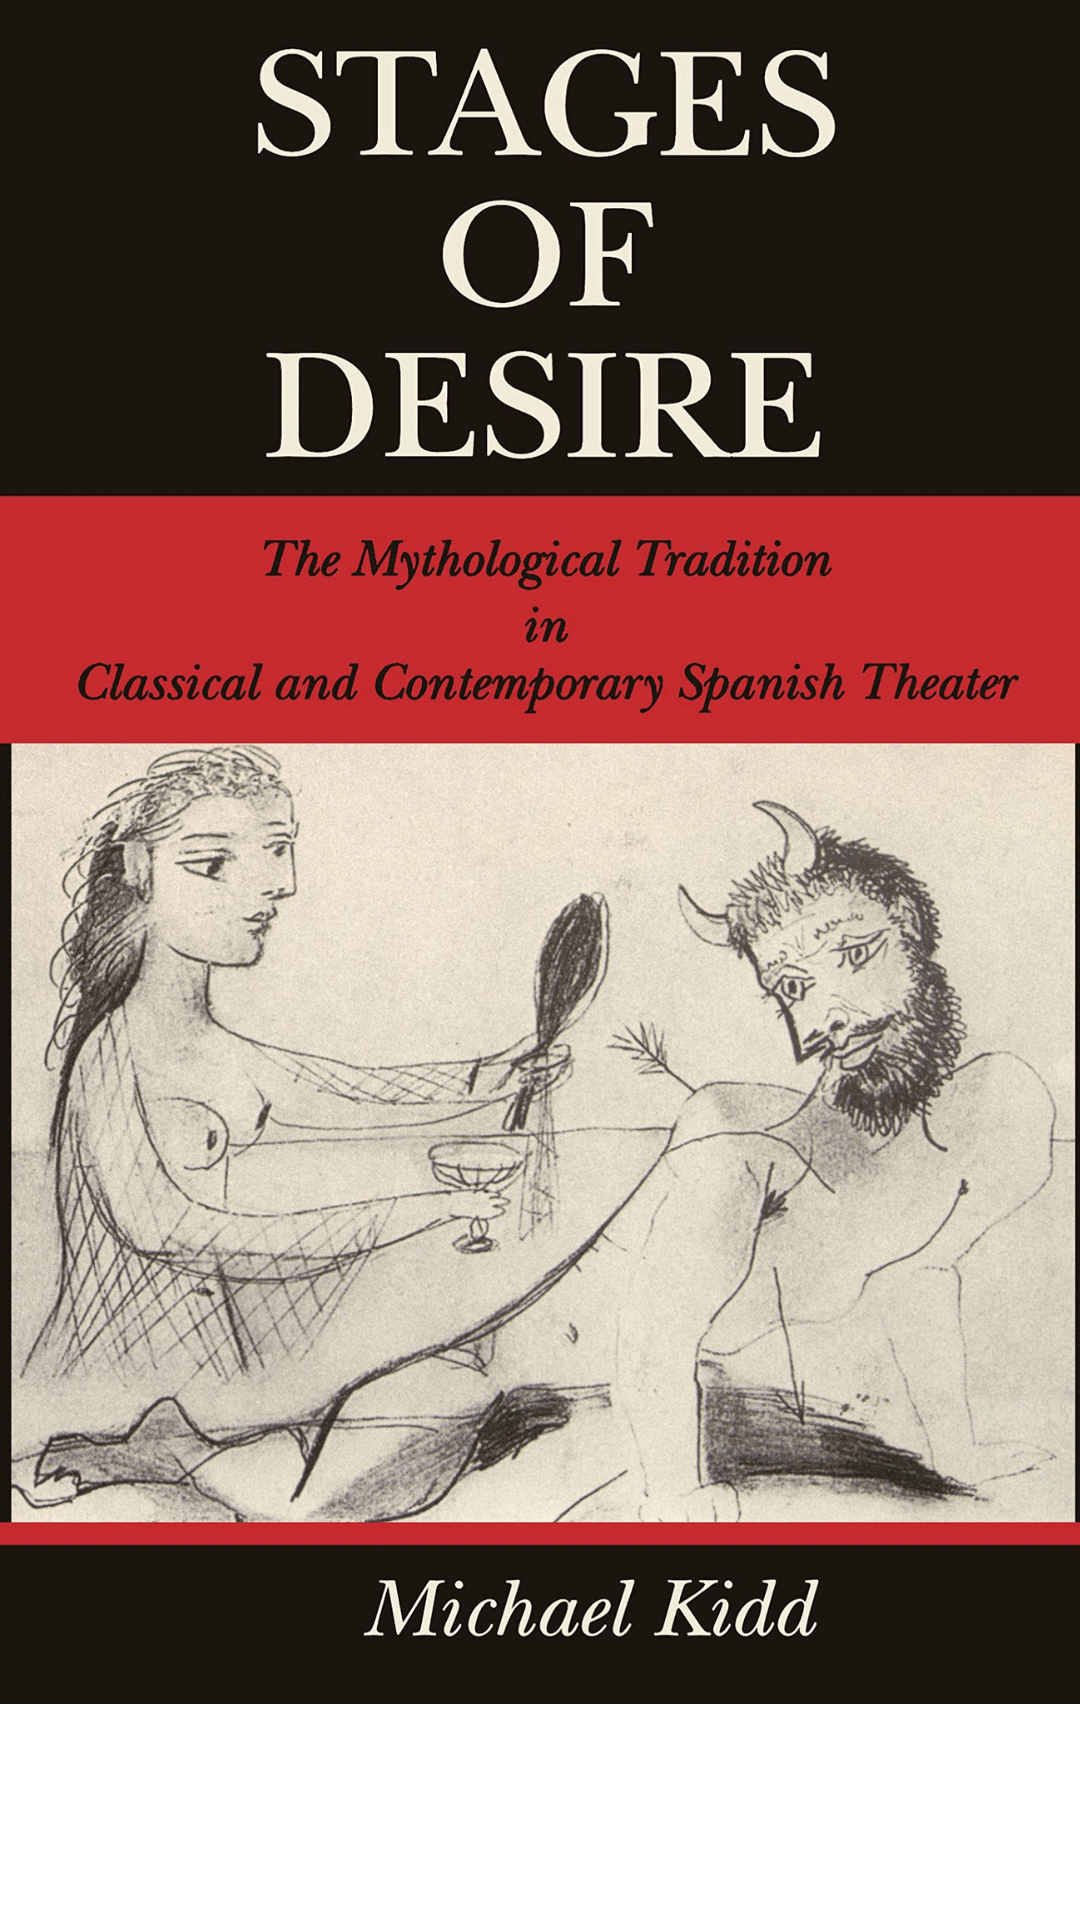 Stages of Desire: The Mythological Tradition in Classical and Contemporary Spanish Theater